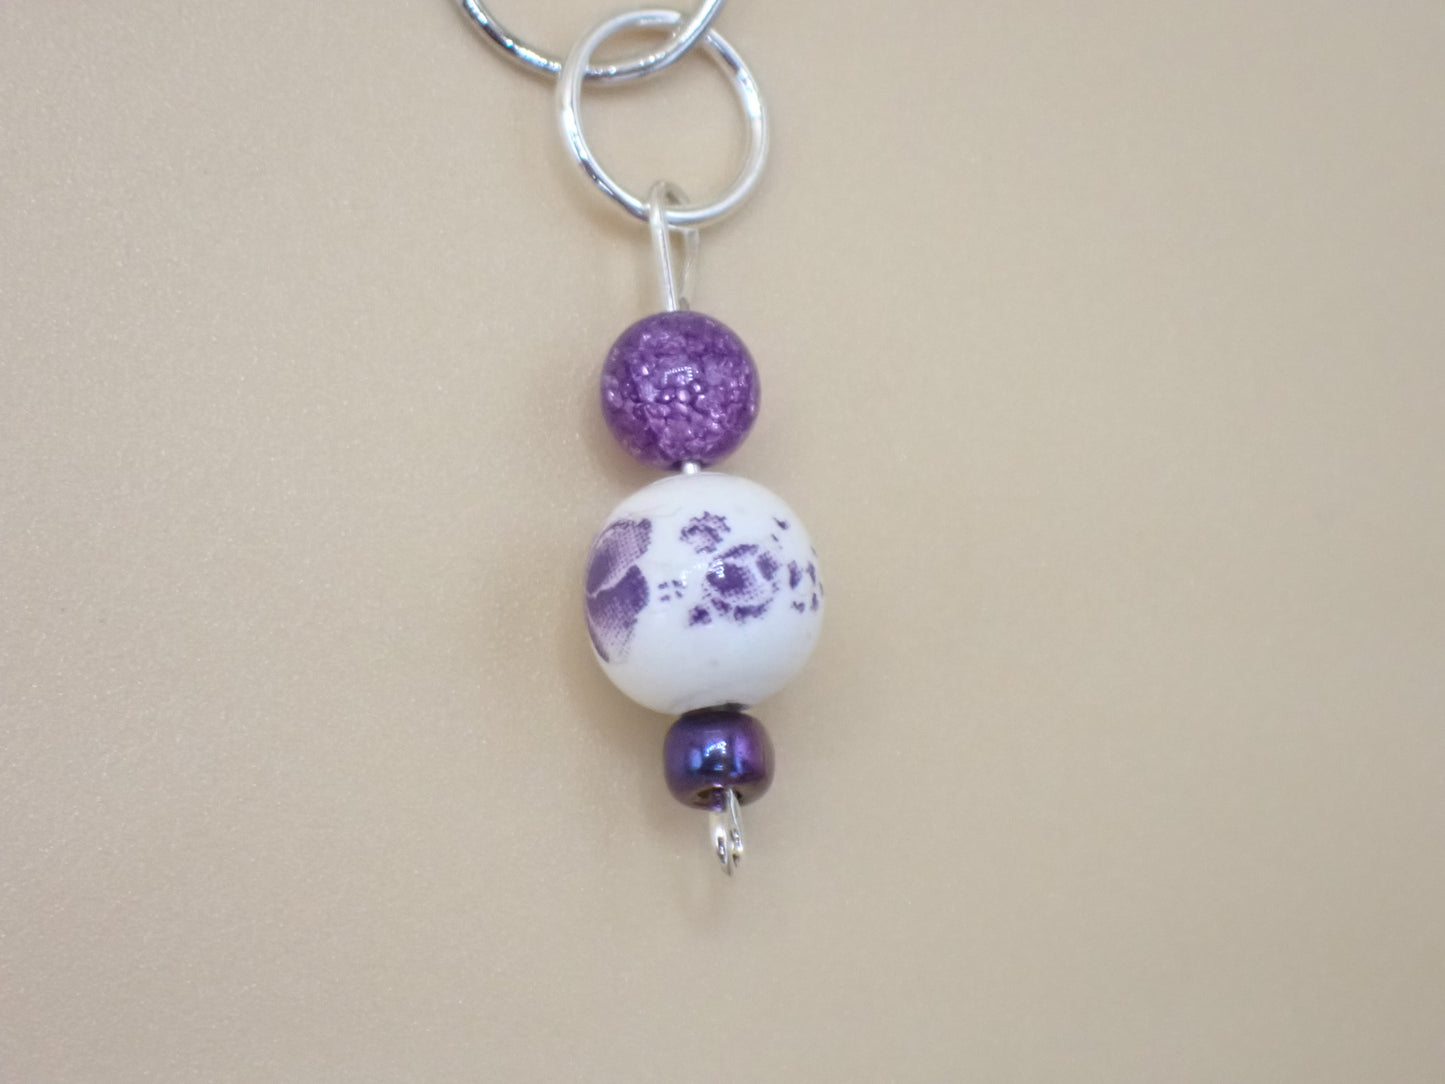 Row Counter Chain for Knit or Crochet, with Small Purple Flowers on White Bead